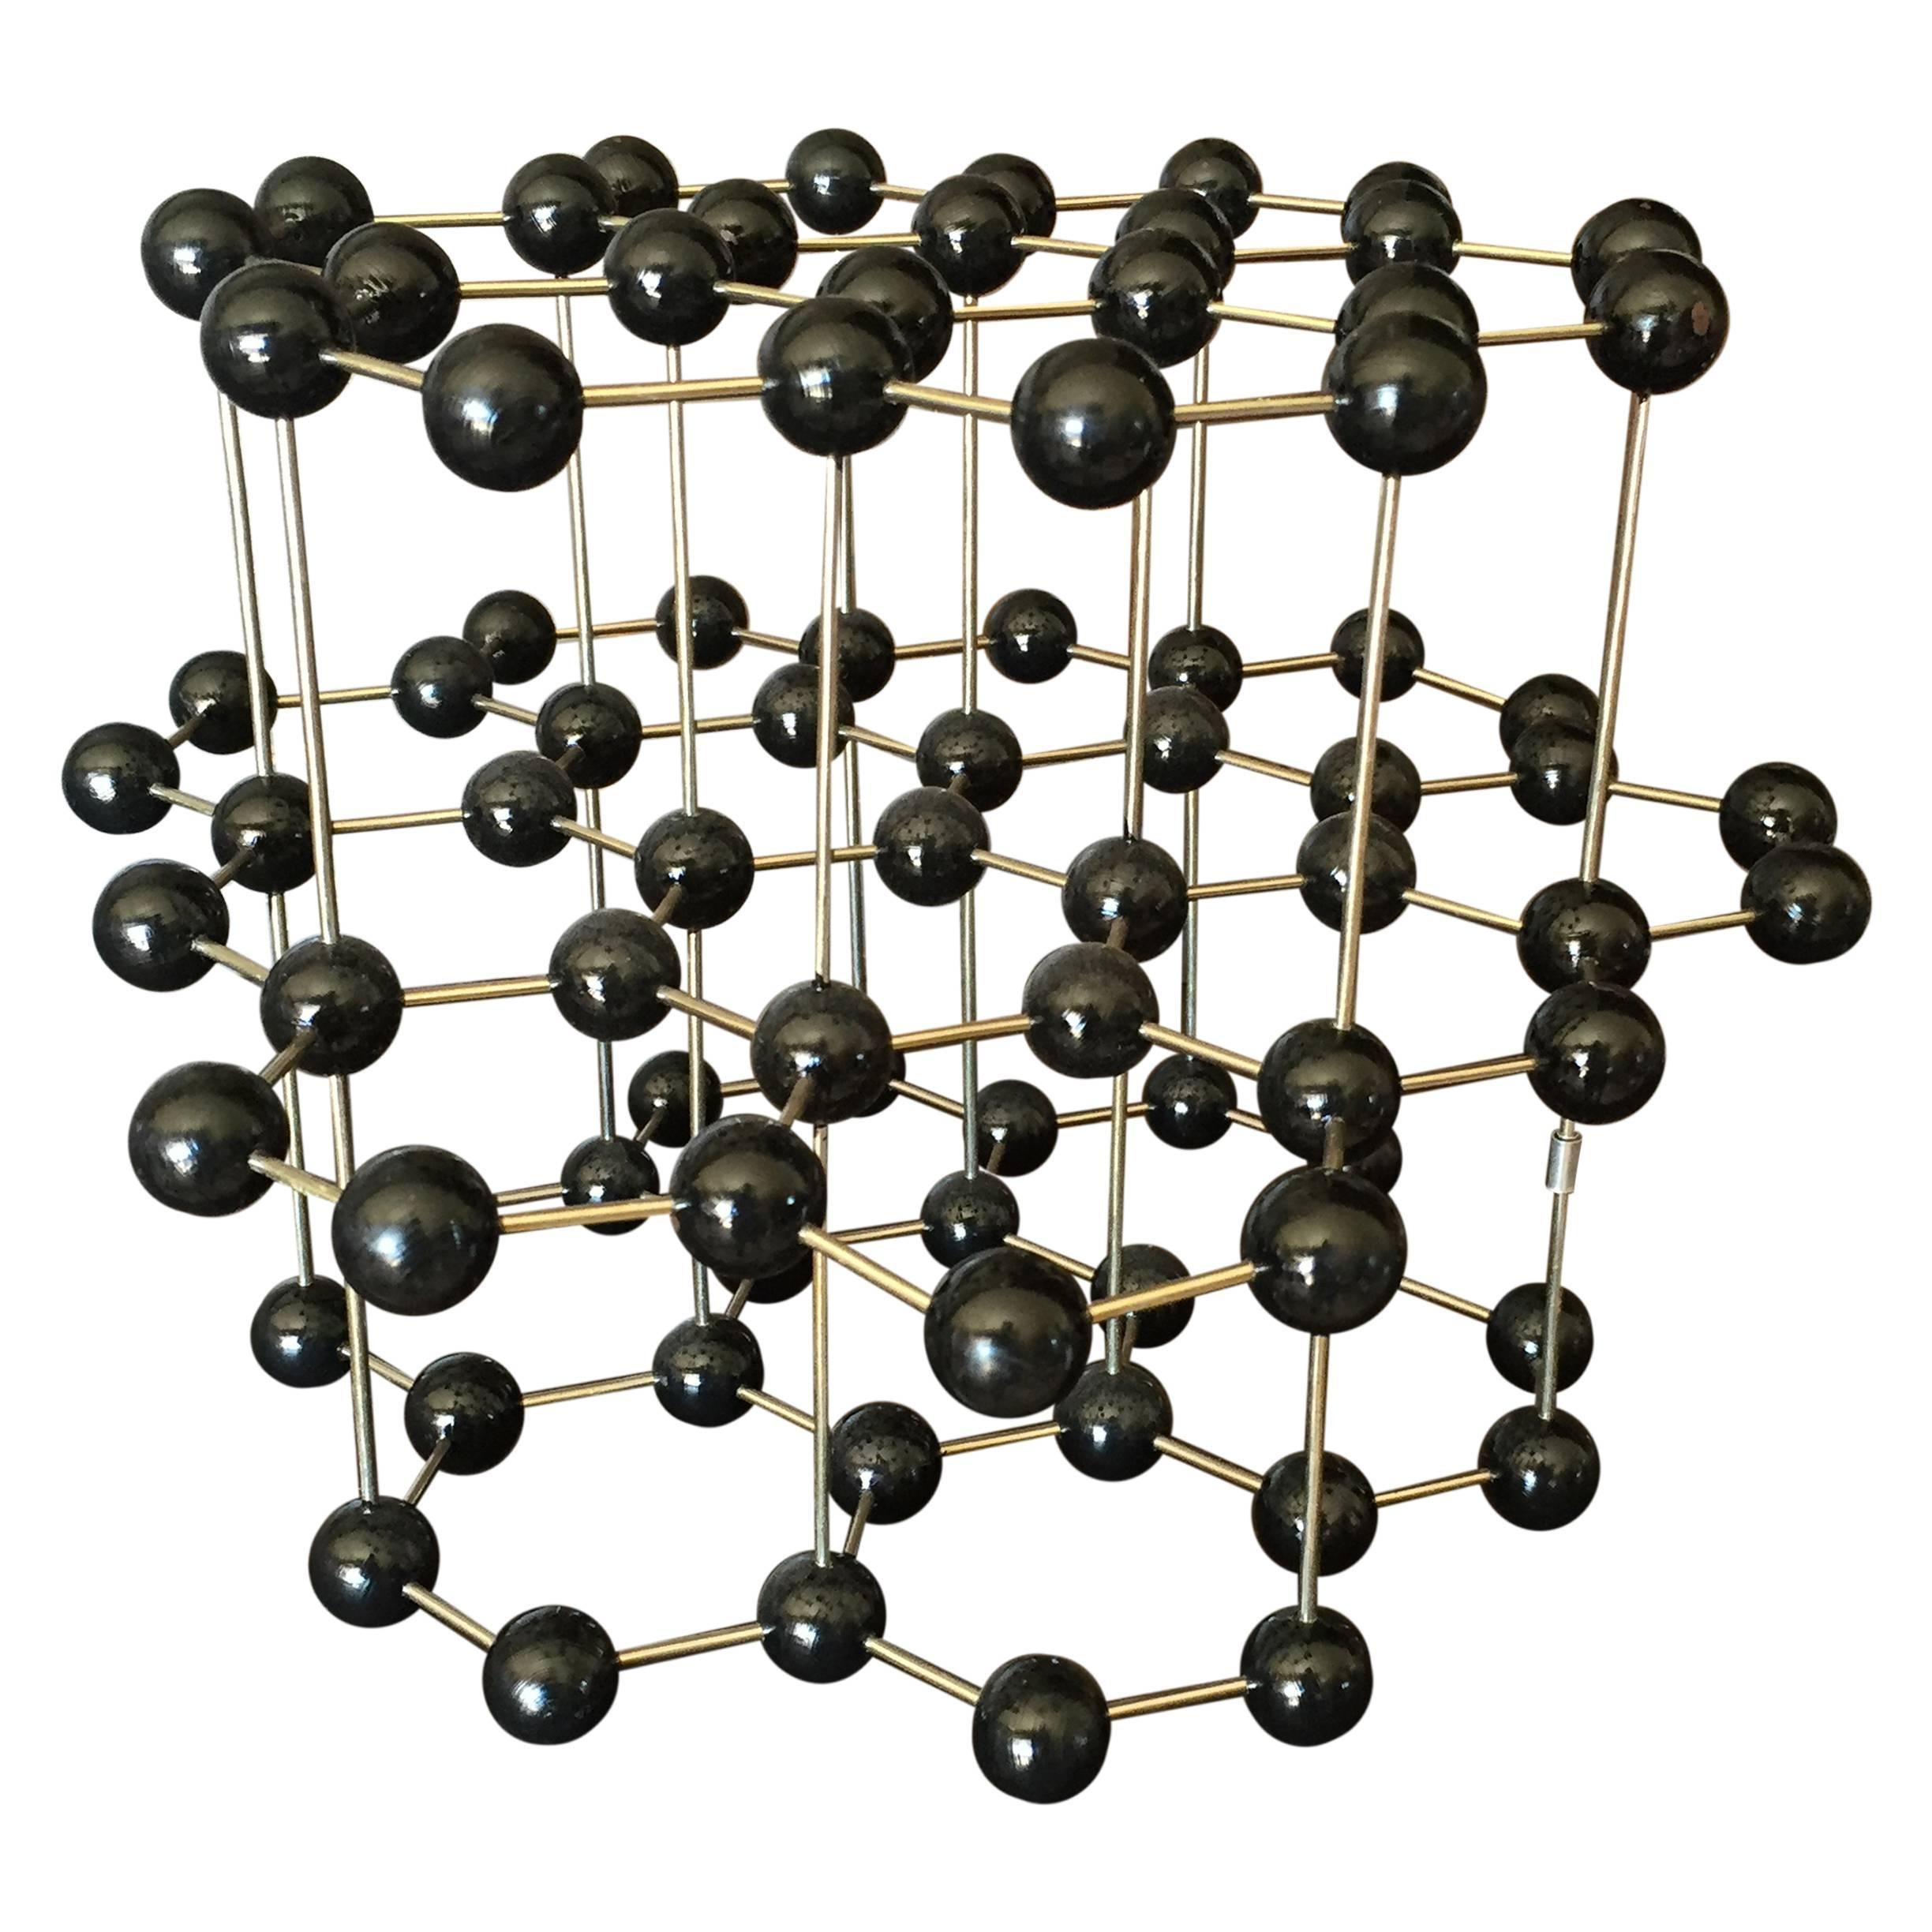 Vintage Ball and Stick Molecular Model of Graphite 